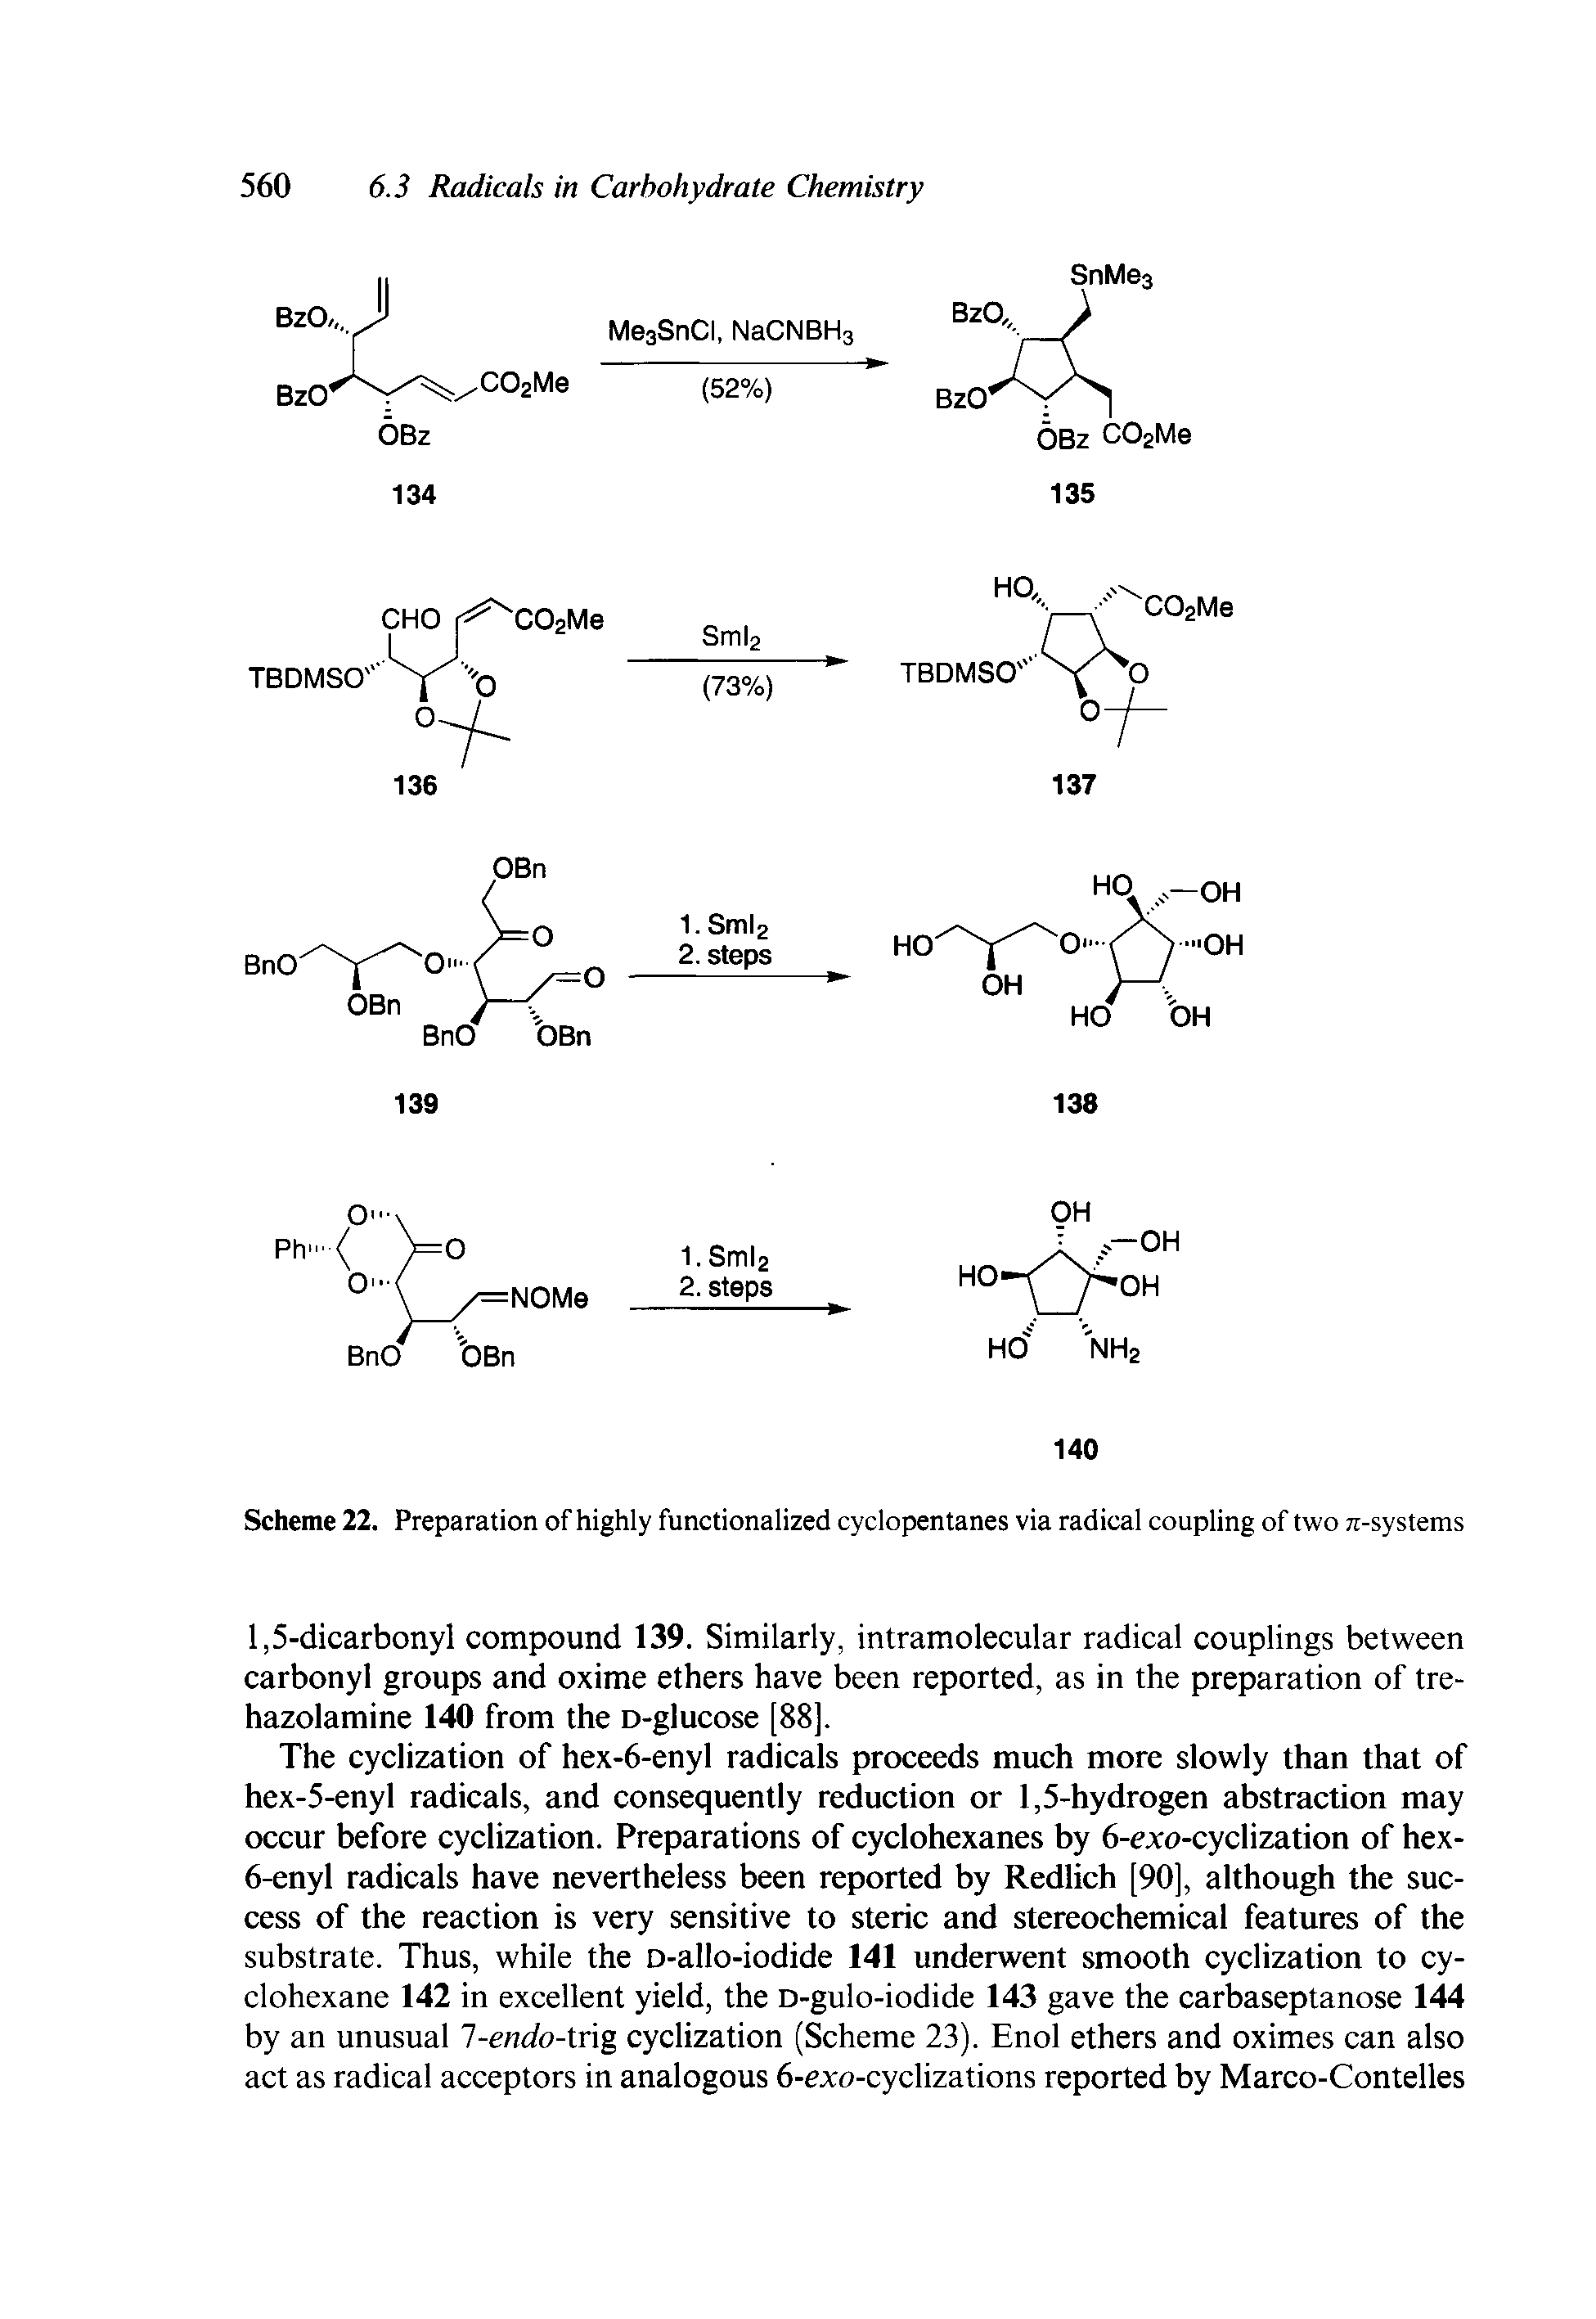 Scheme 22. Preparation of highly functionalized cyclopentanes via radical coupling of two 71-systems...